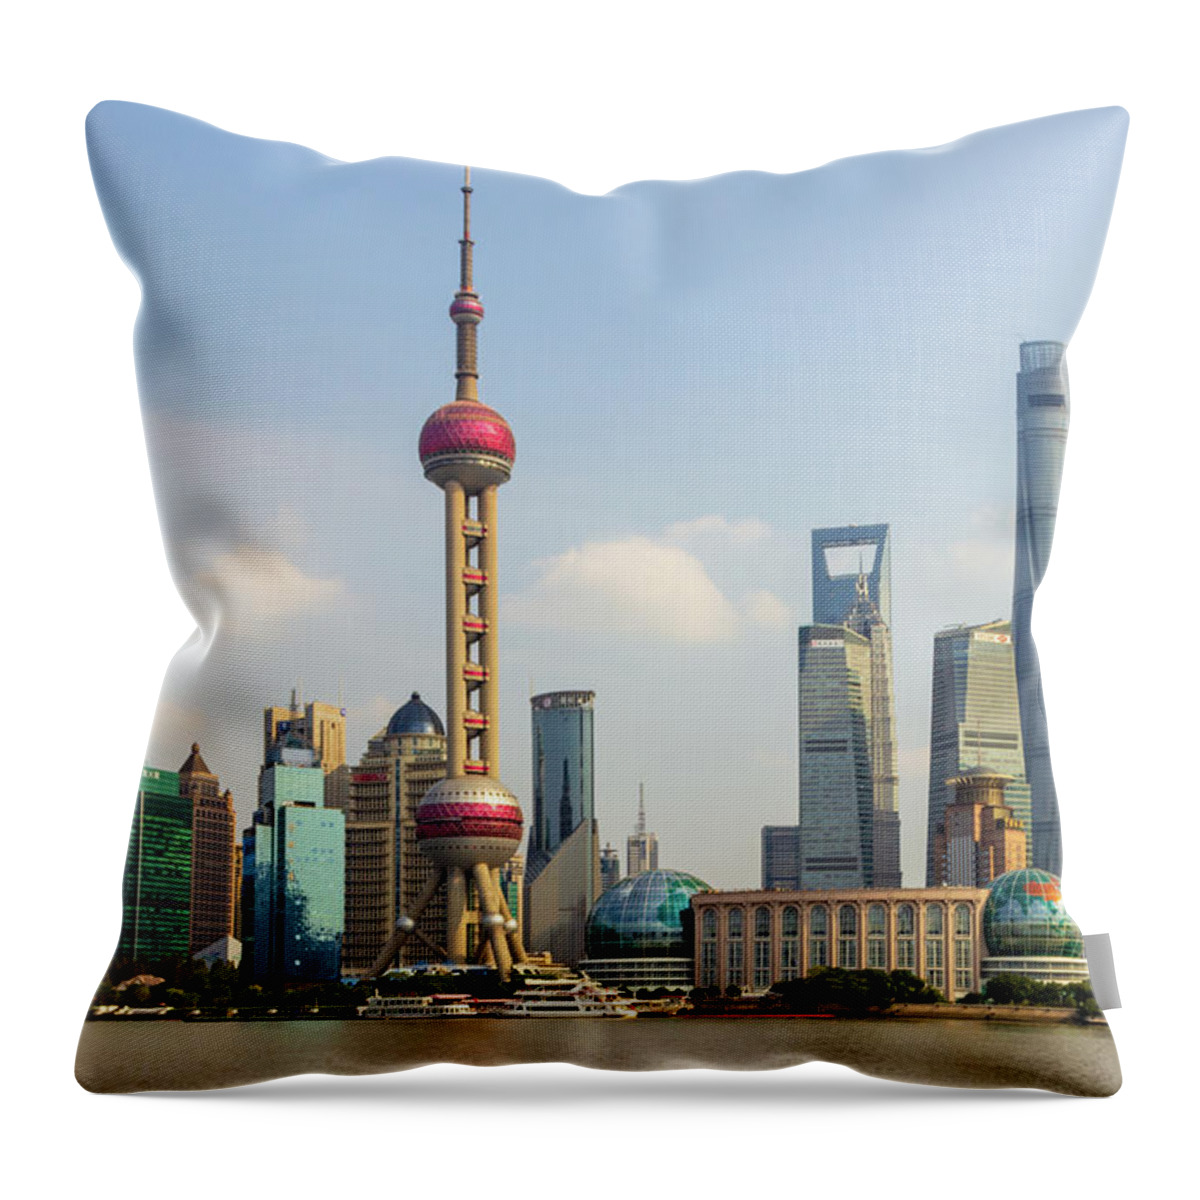 China Throw Pillow featuring the photograph Shanghai City View by Aashish Vaidya